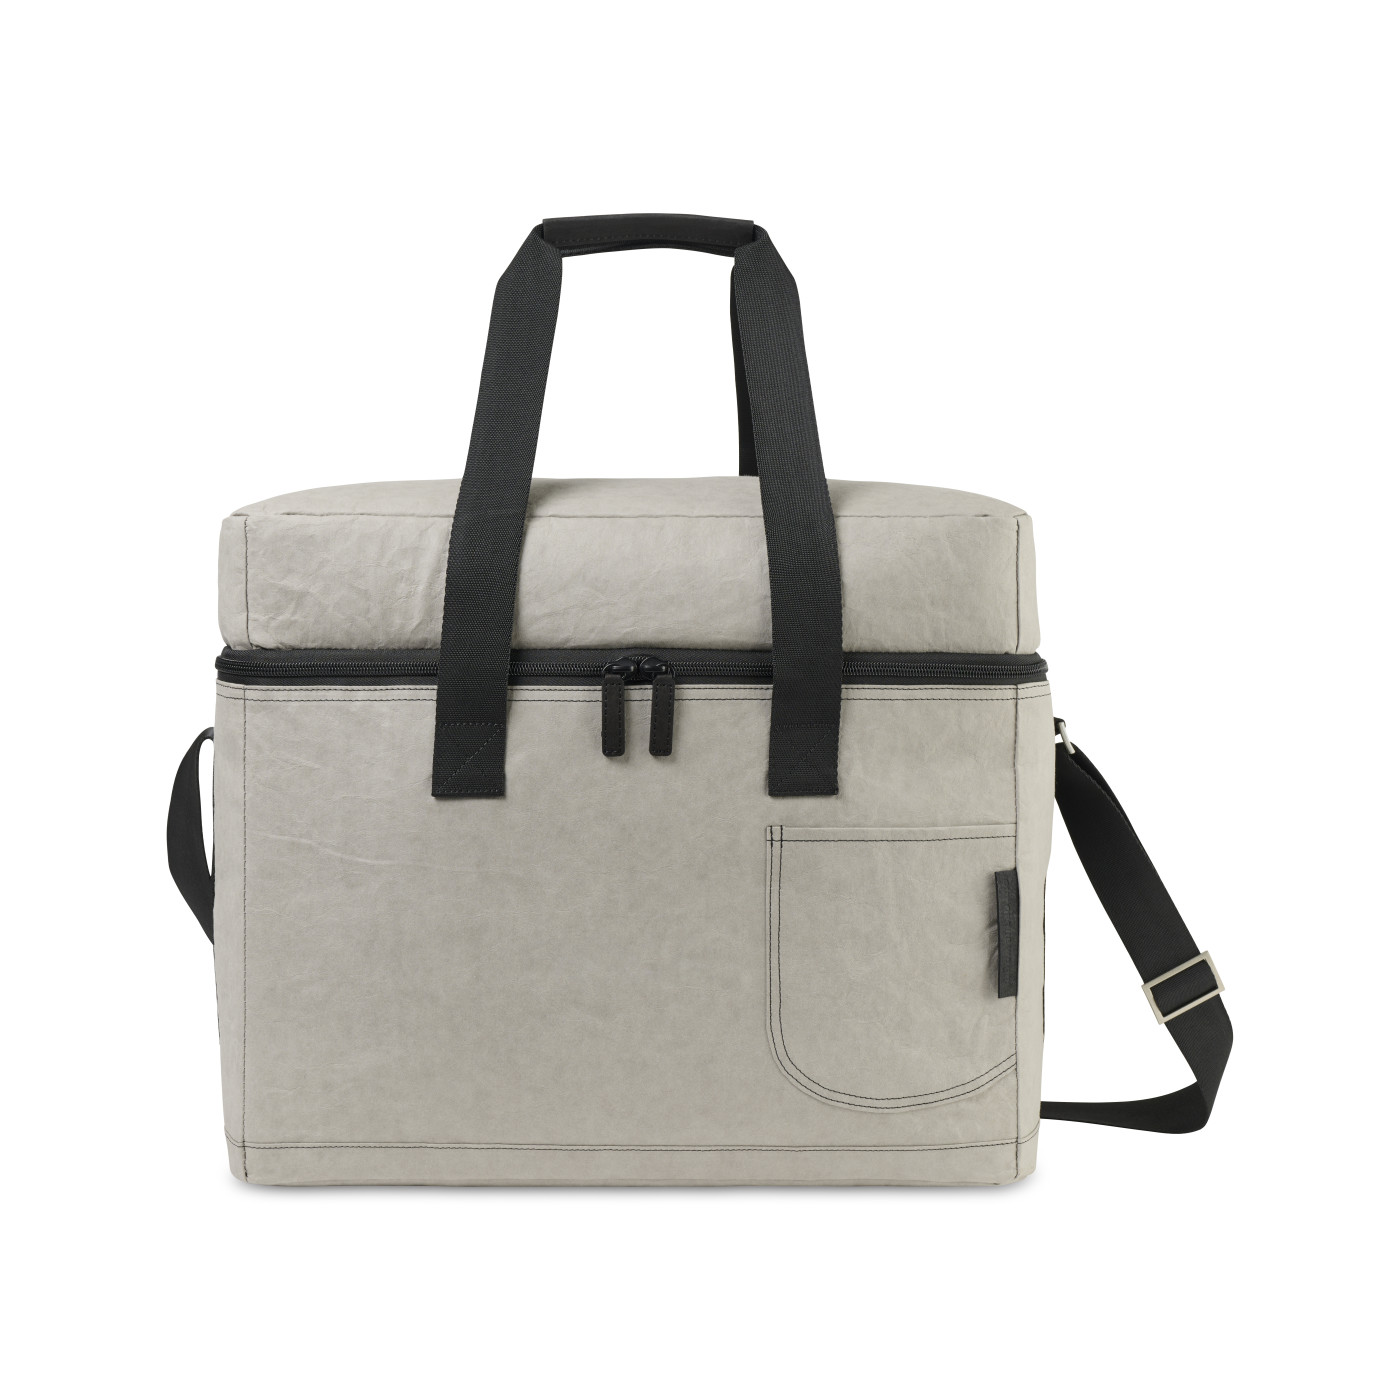 Out of The Woods 101929 - Seagull XL Cooler